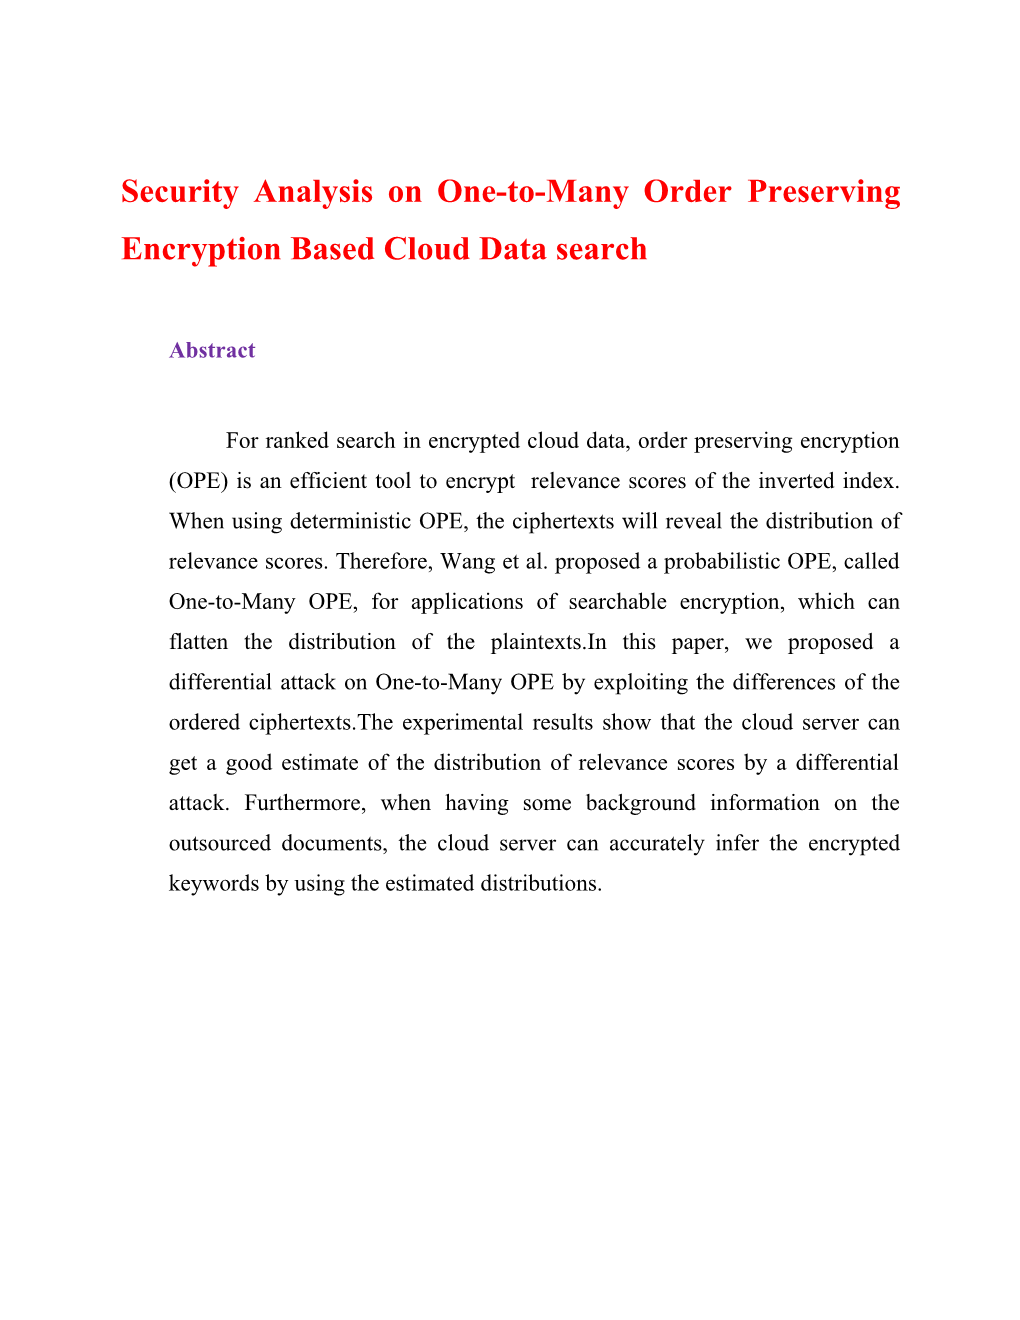 Security Analysis on One-To-Many Orderpreserving Encryption Based Cloud Datasearch